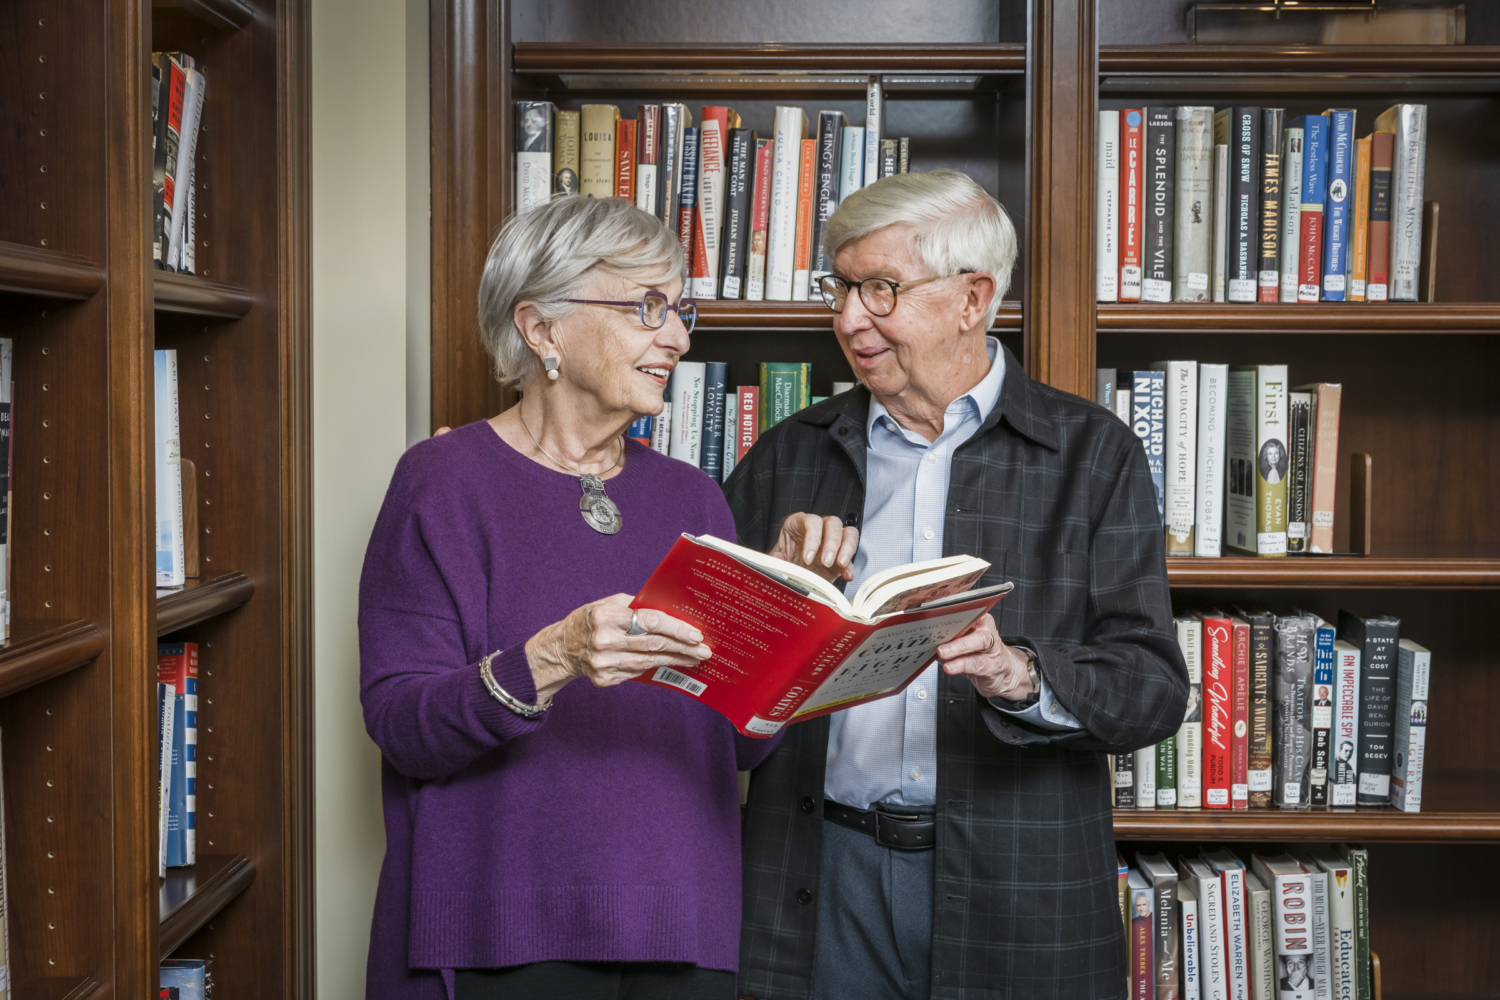 a senior couple standing in front of a bookcase reading a book together and talking